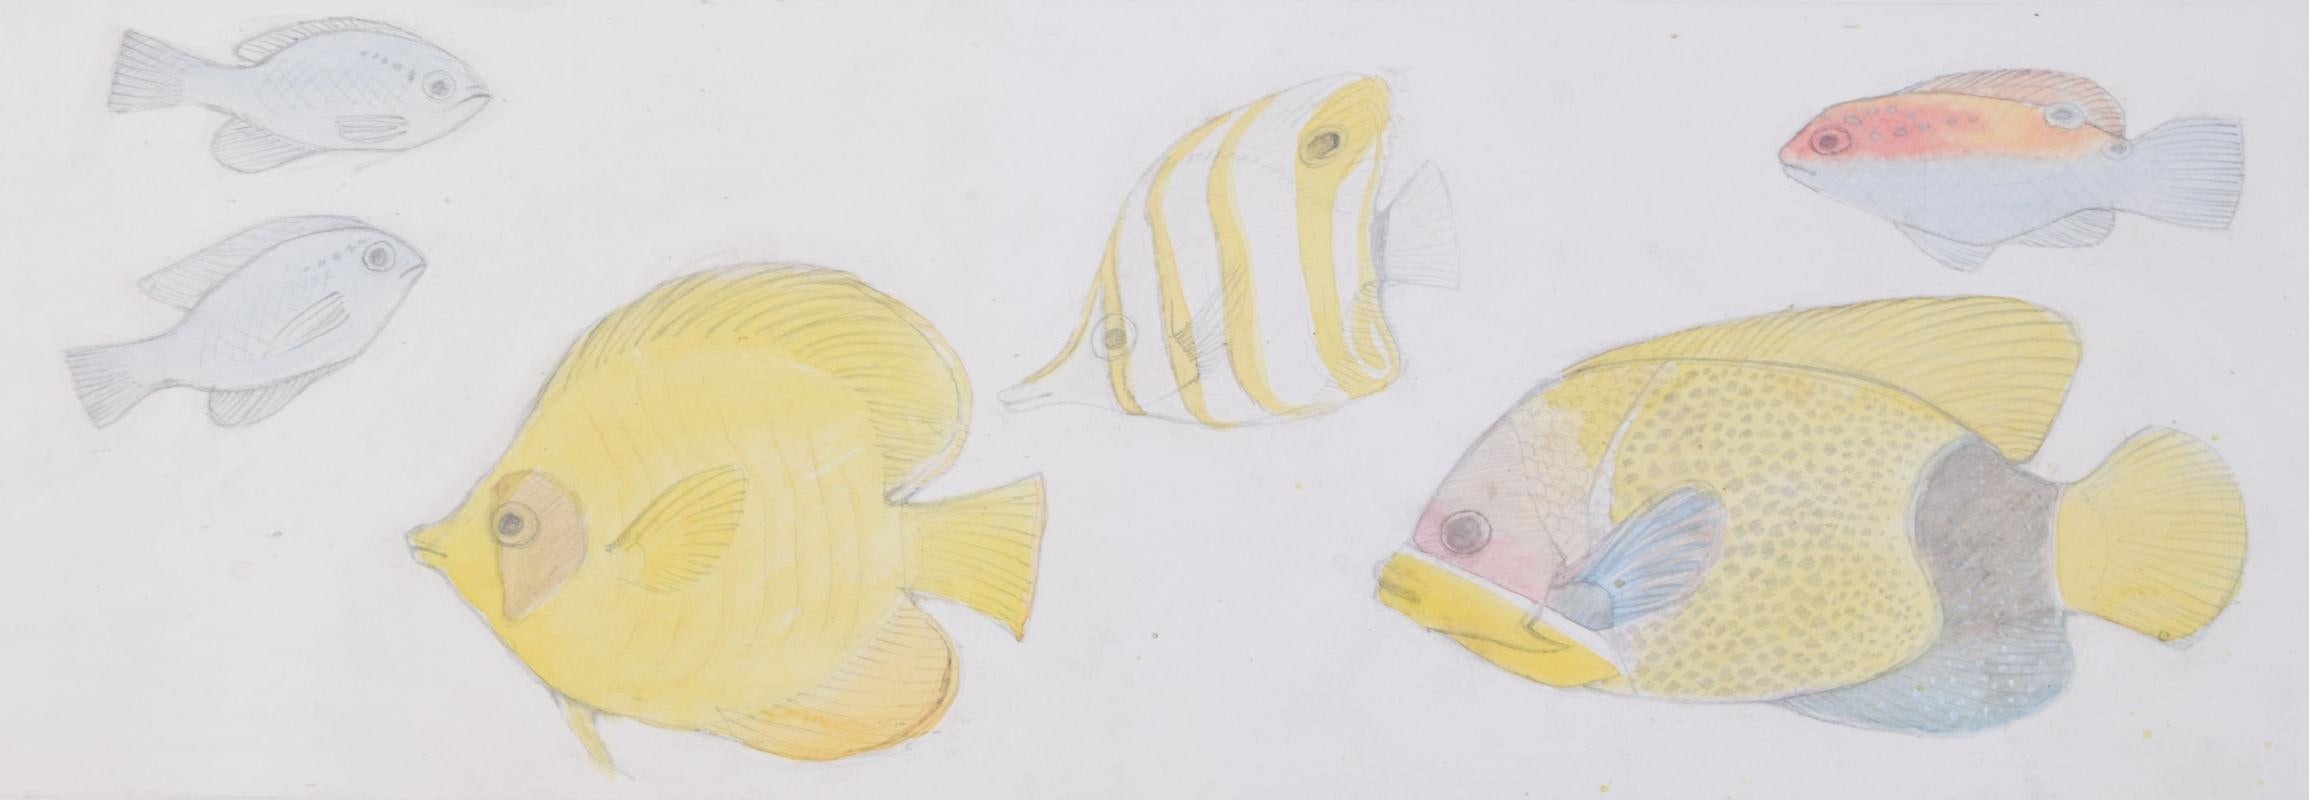 We acquired a series of watercolour stained glass designs from Jane Gray's studio. To find more scroll down to "More from this Seller" and below it click on "See all from this seller."   

Jane Gray (born 1931) 
Fish (1960) 
Pencil and